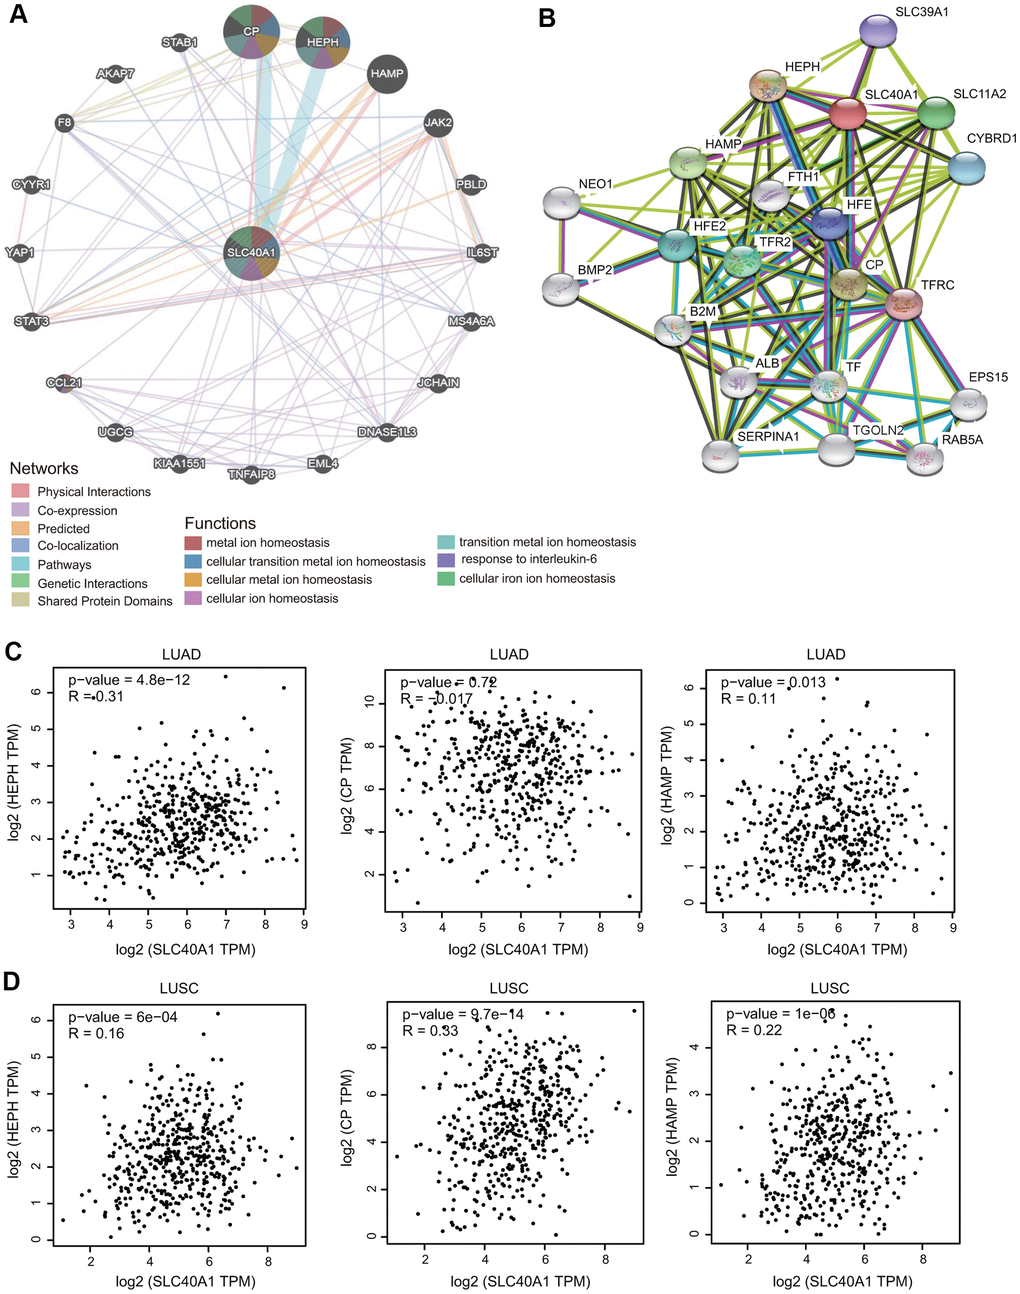 Interaction network of FPN1. (A) An interaction network for FPN1 was generated through the GeneMANIA database. (B) A PPI network for FPN1 was generated through the STRING database. (C, D) Scatterplots showing the correlation between FPN1 and HEPH, CP and HAMP expression in LUAD and LUSC.